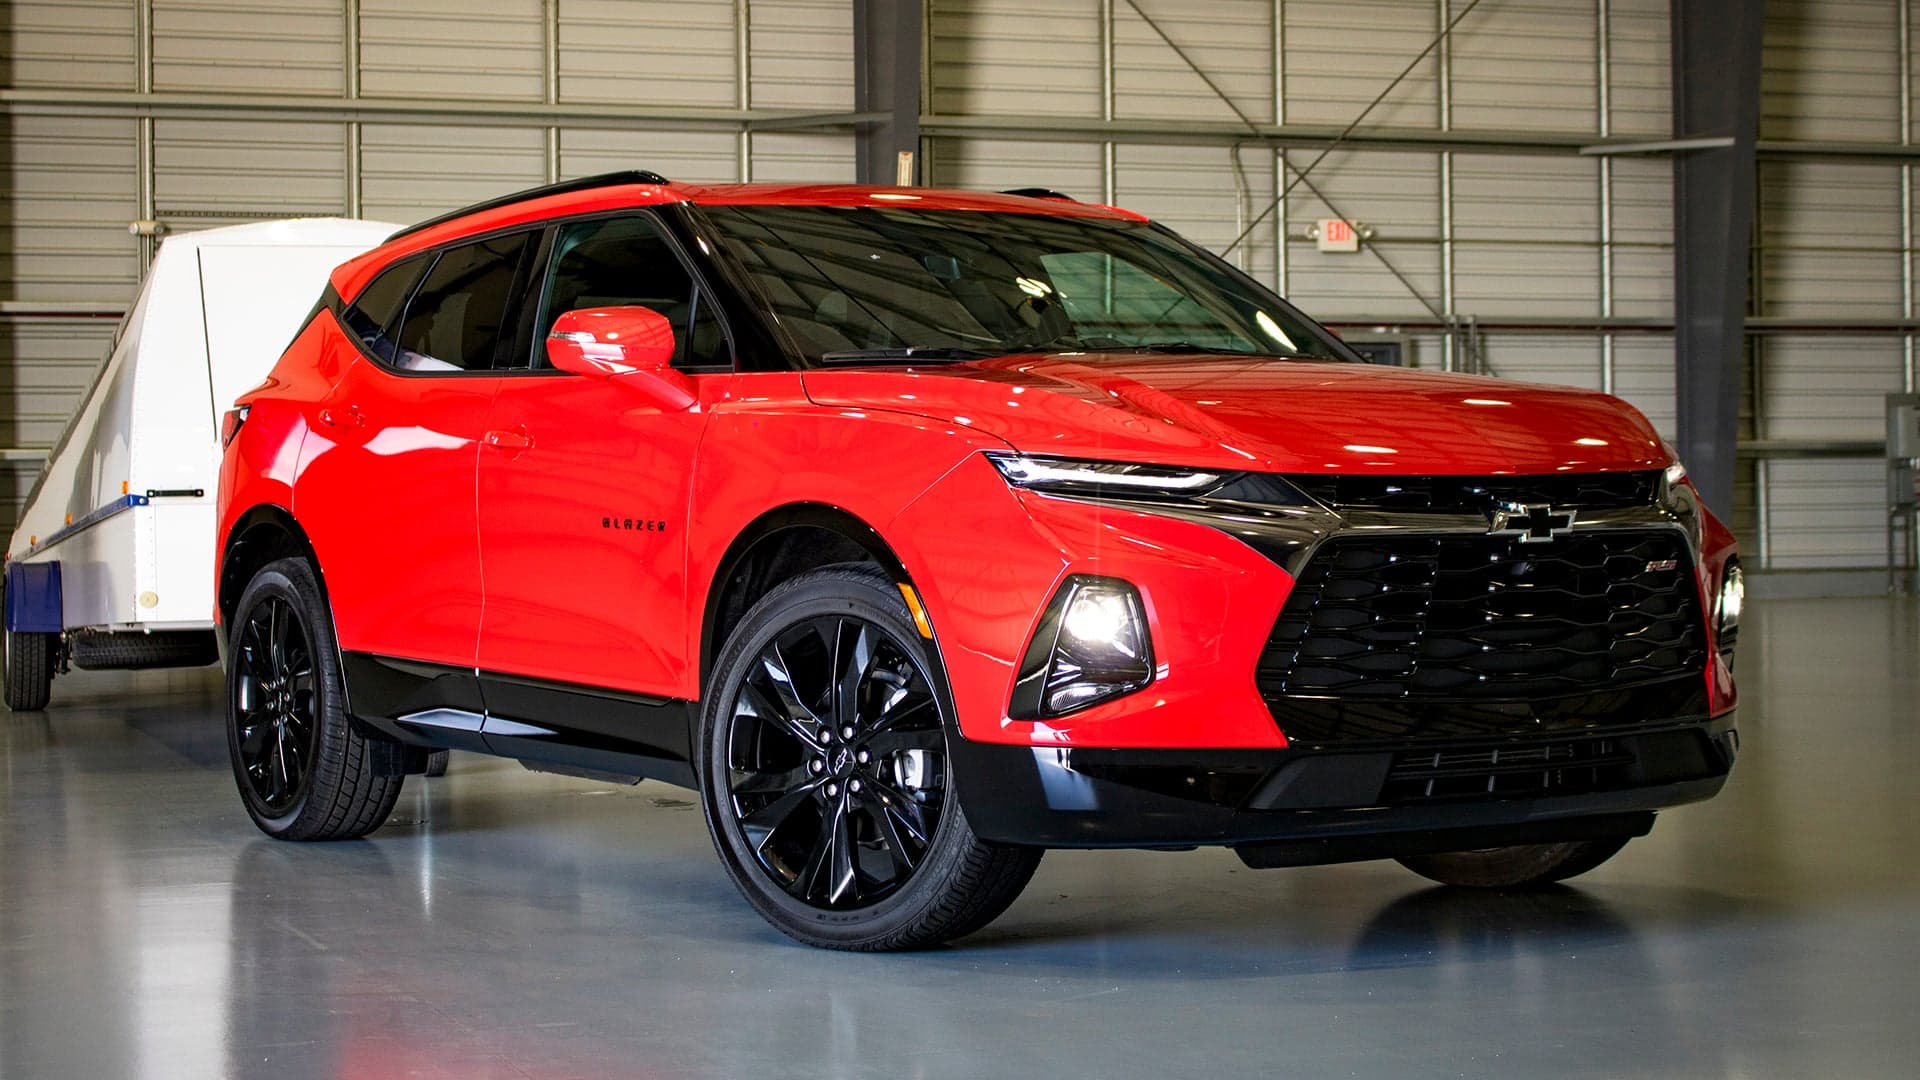 2019 Chevrolet Blazer First Drive: A Crossover Comeback, With Mixed Results